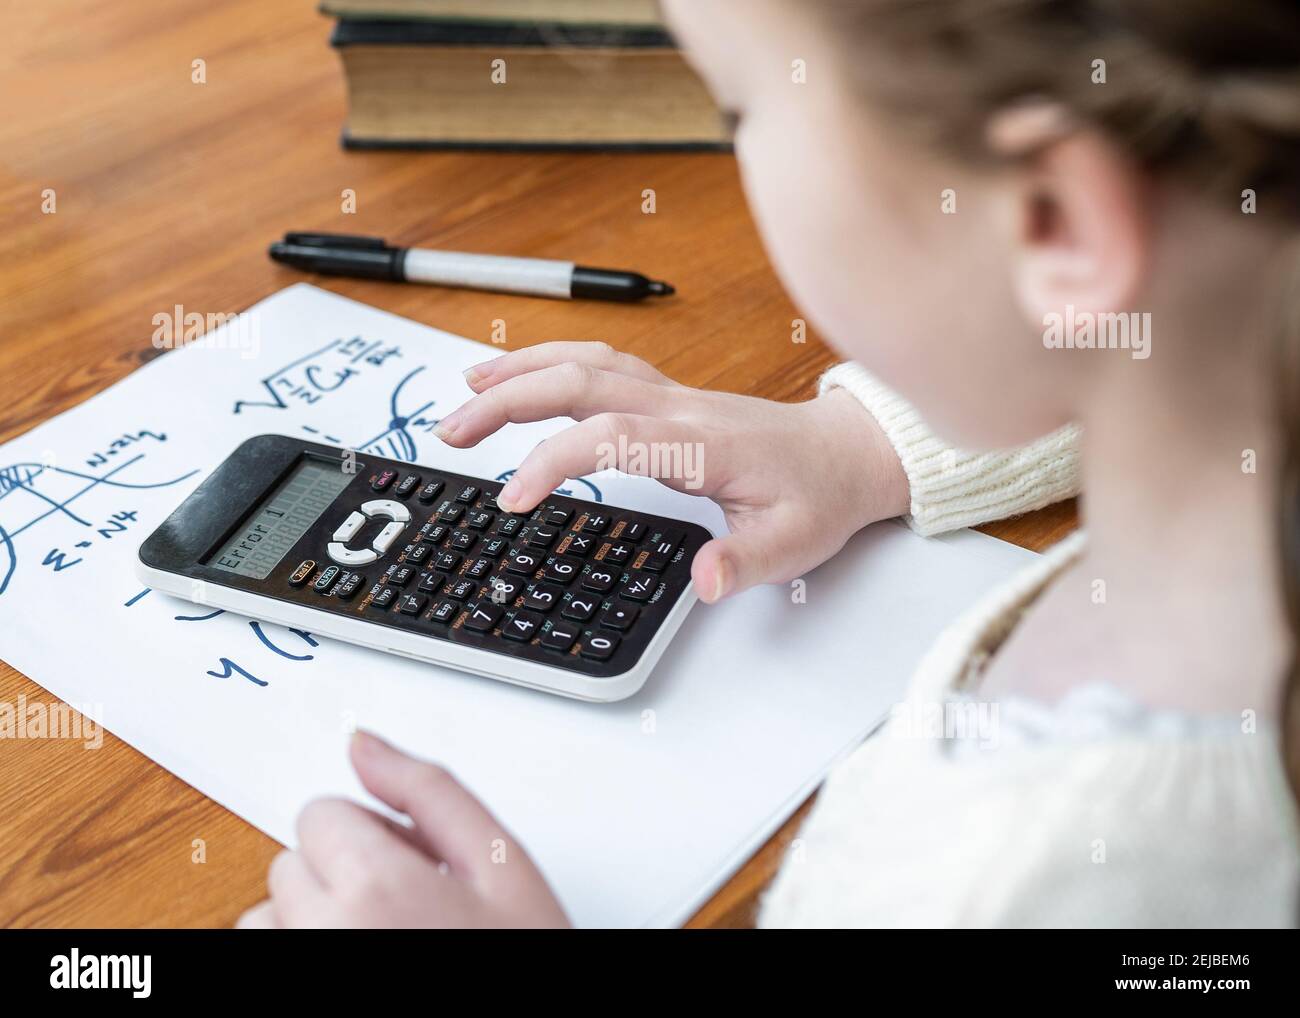 Calculation error young girl using calculator with error message on LCD screen unable to solve complicated maths problems Stock Photo